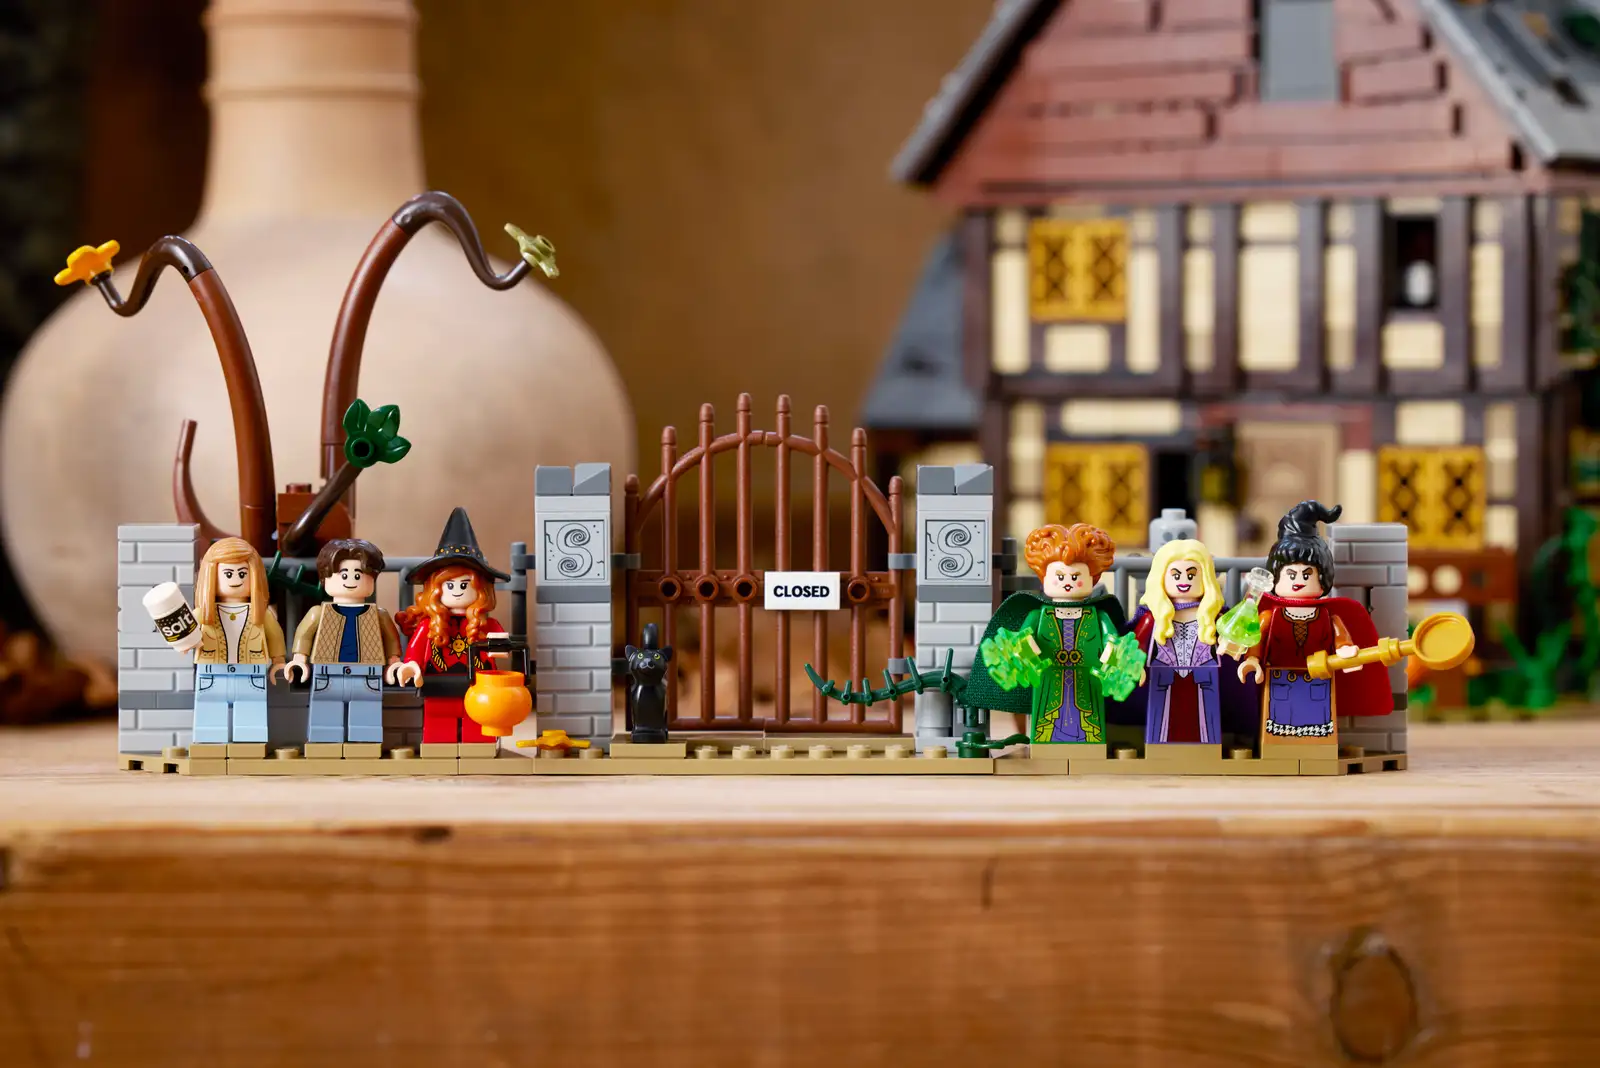 LEGO is Released A ‘Hocus Pocus’ LEGO Set Today and It Is Glorious